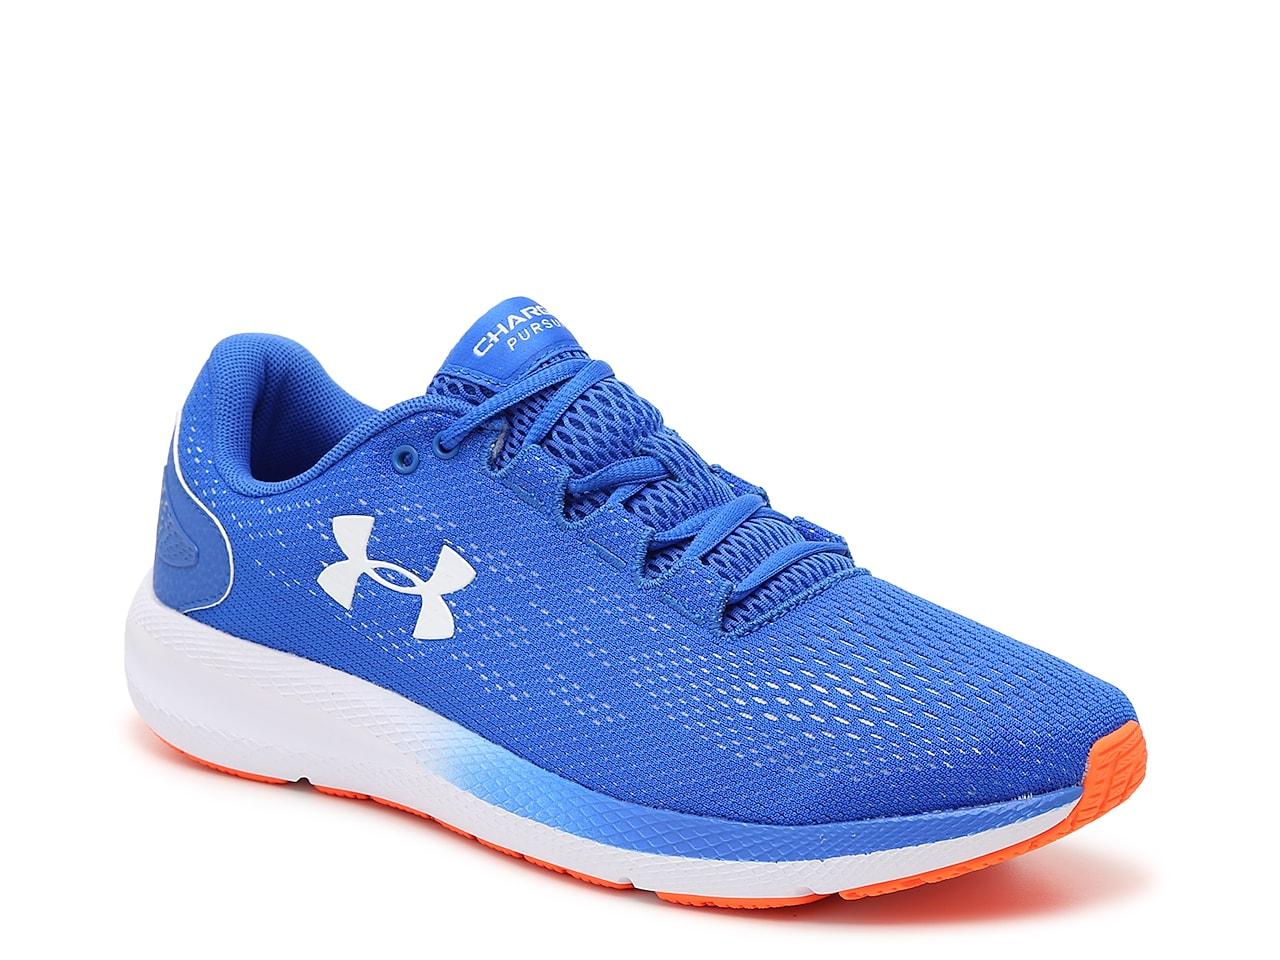 Under Armour Charged Pursuit 2 Running Shoe in Blue for Men